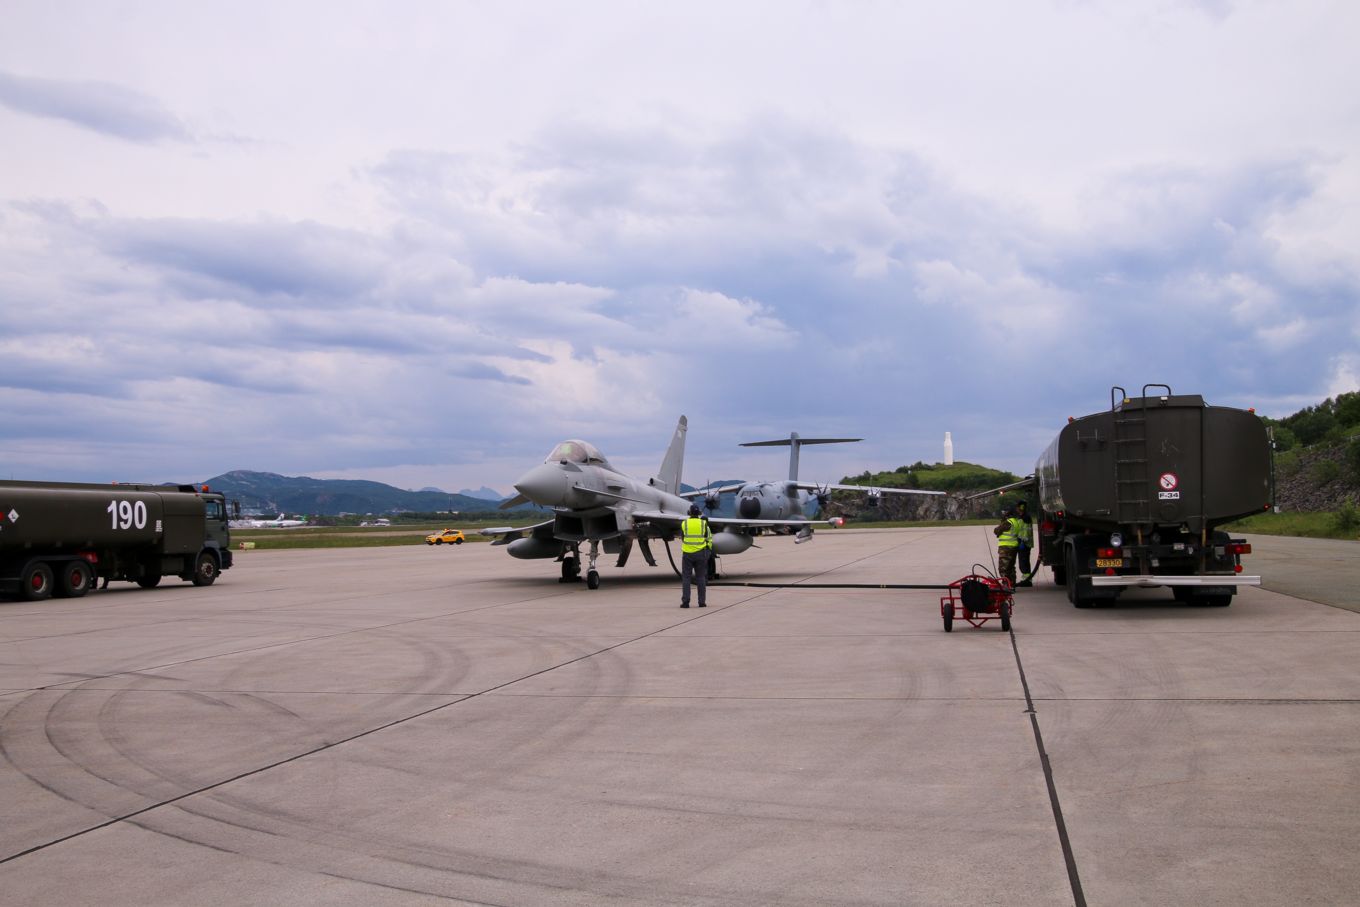 Typhoon being refuelled, with A400M Atlas personnel and vehicles.